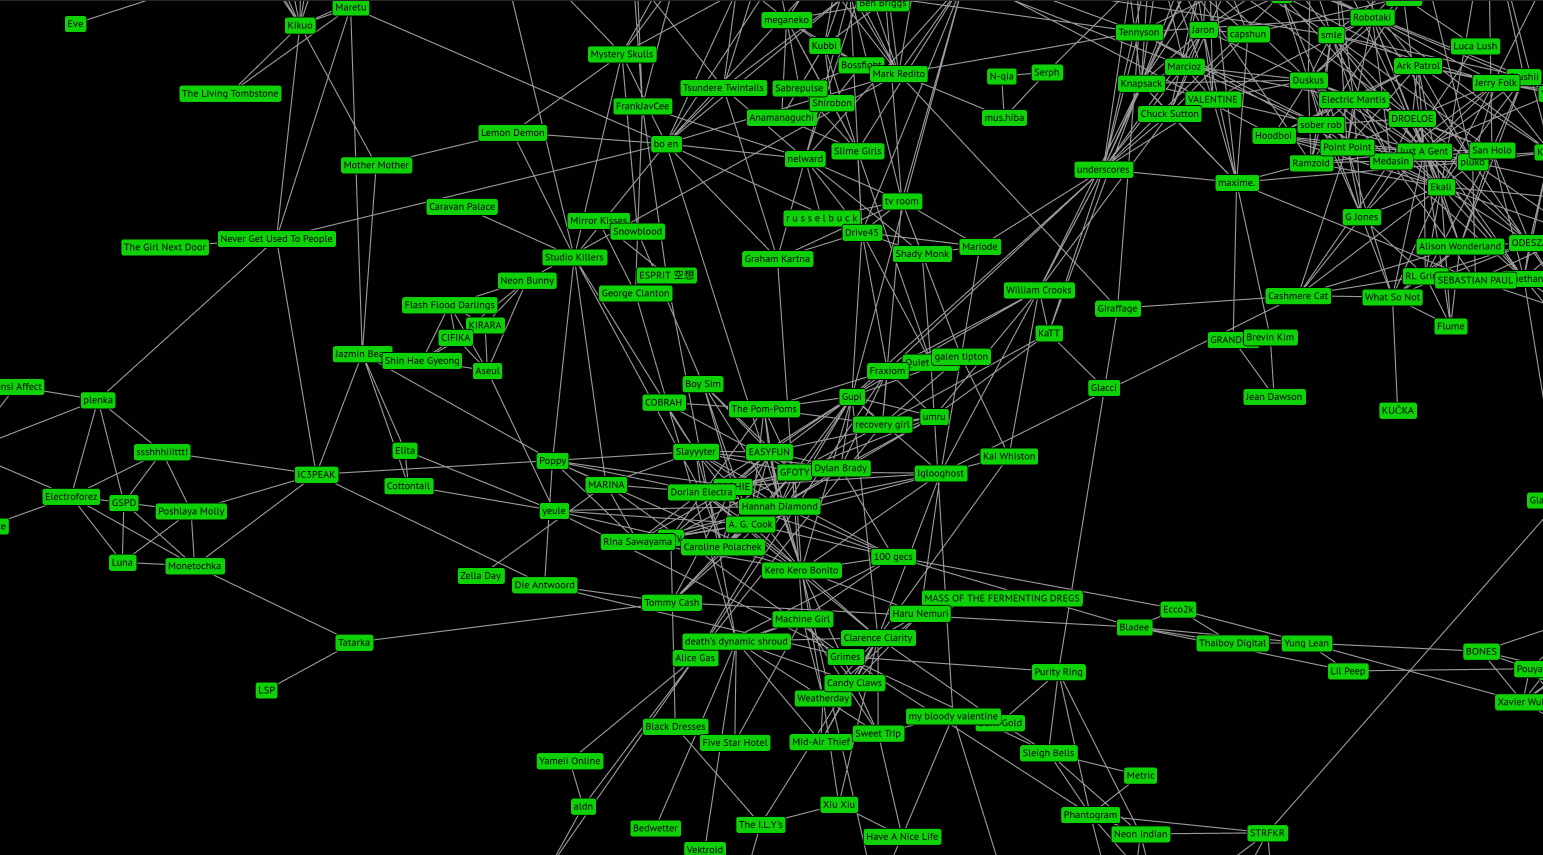 A screenshot of Spotifytrack showing the artist relationship graph, an interactive visualization of the relationship between a user's top artists